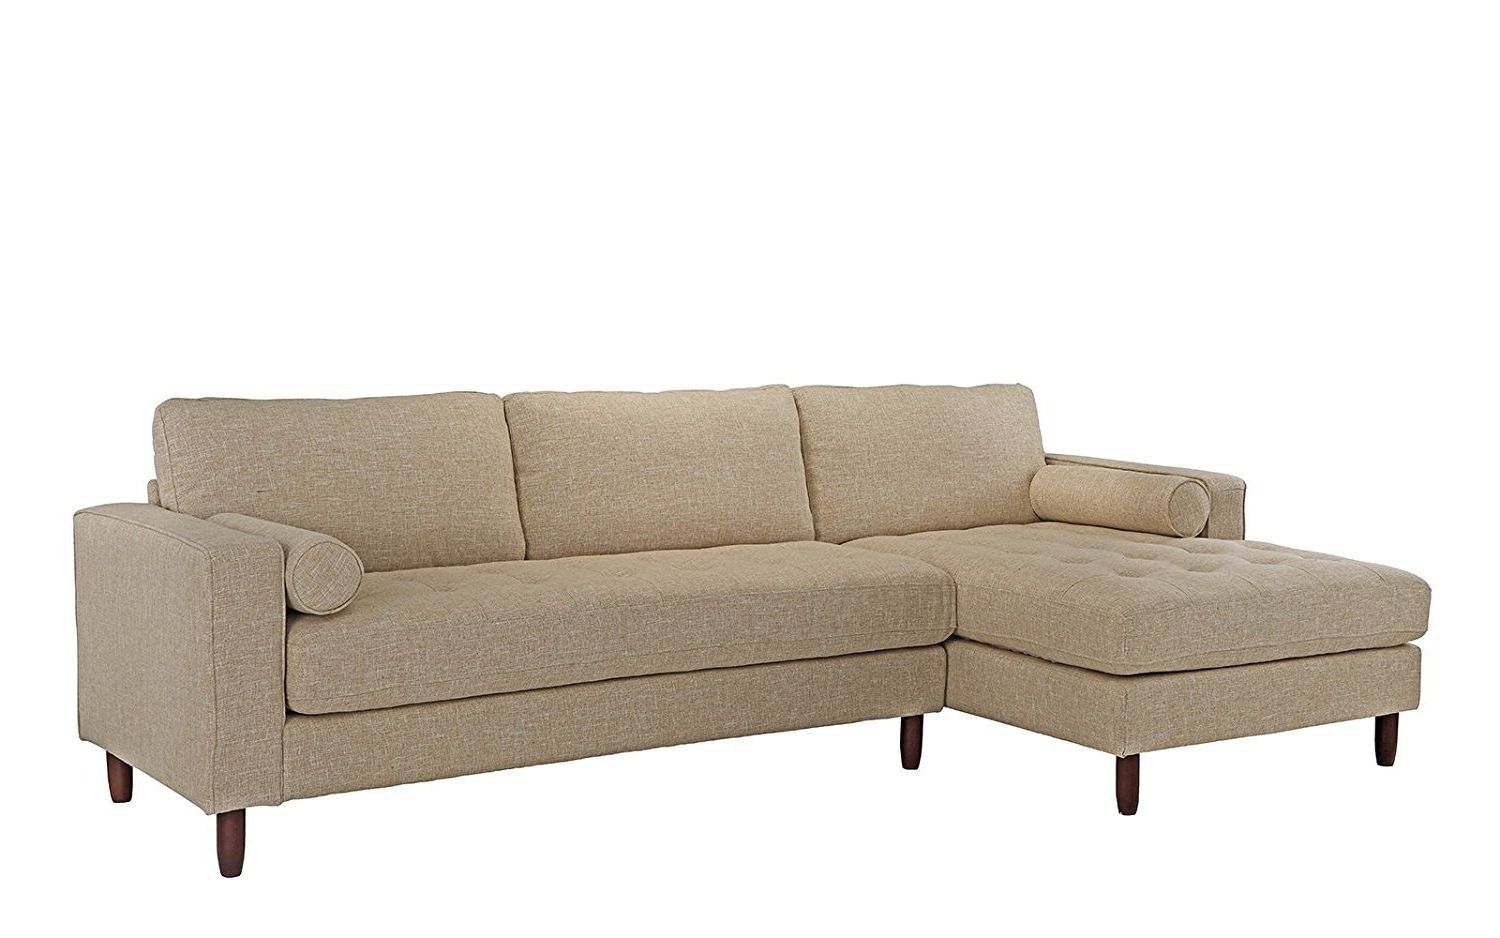 Mid Century Modern Tufted Fabric Sectional Sofa, L Shape Couch Beige Regarding Small L Shaped Sectional Sofas In Beige (View 8 of 20)